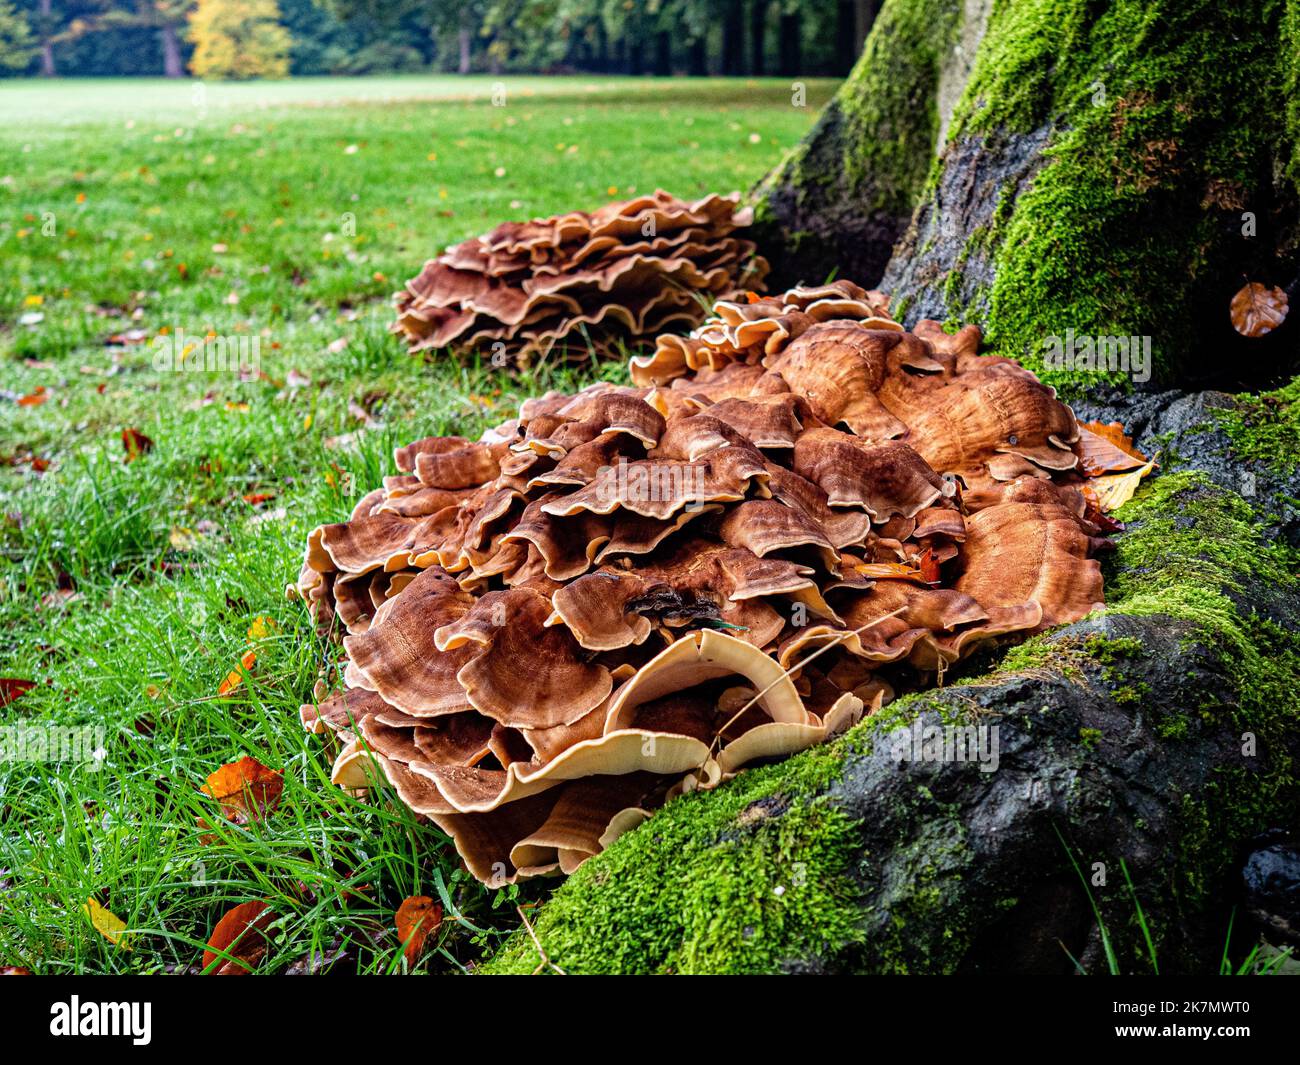 A group of 'Sulfur fungus' mushrooms is seen growing down on a cutting log. During the autumn season, the landscape in The Netherlands is flooded with green, ochre, golden and reddish colors surrounded by different species of mushrooms. There are around 5,250 species of mushrooms in the Netherlands. It's the perfect season to take pictures of nature and enjoy the marvelous sights. Many of these are under serious threat and some 200 species have become extinct in the Netherlands over recent decades. (Photo by Ana Fernandez/SOPA Images/Sipa USA) Stock Photo